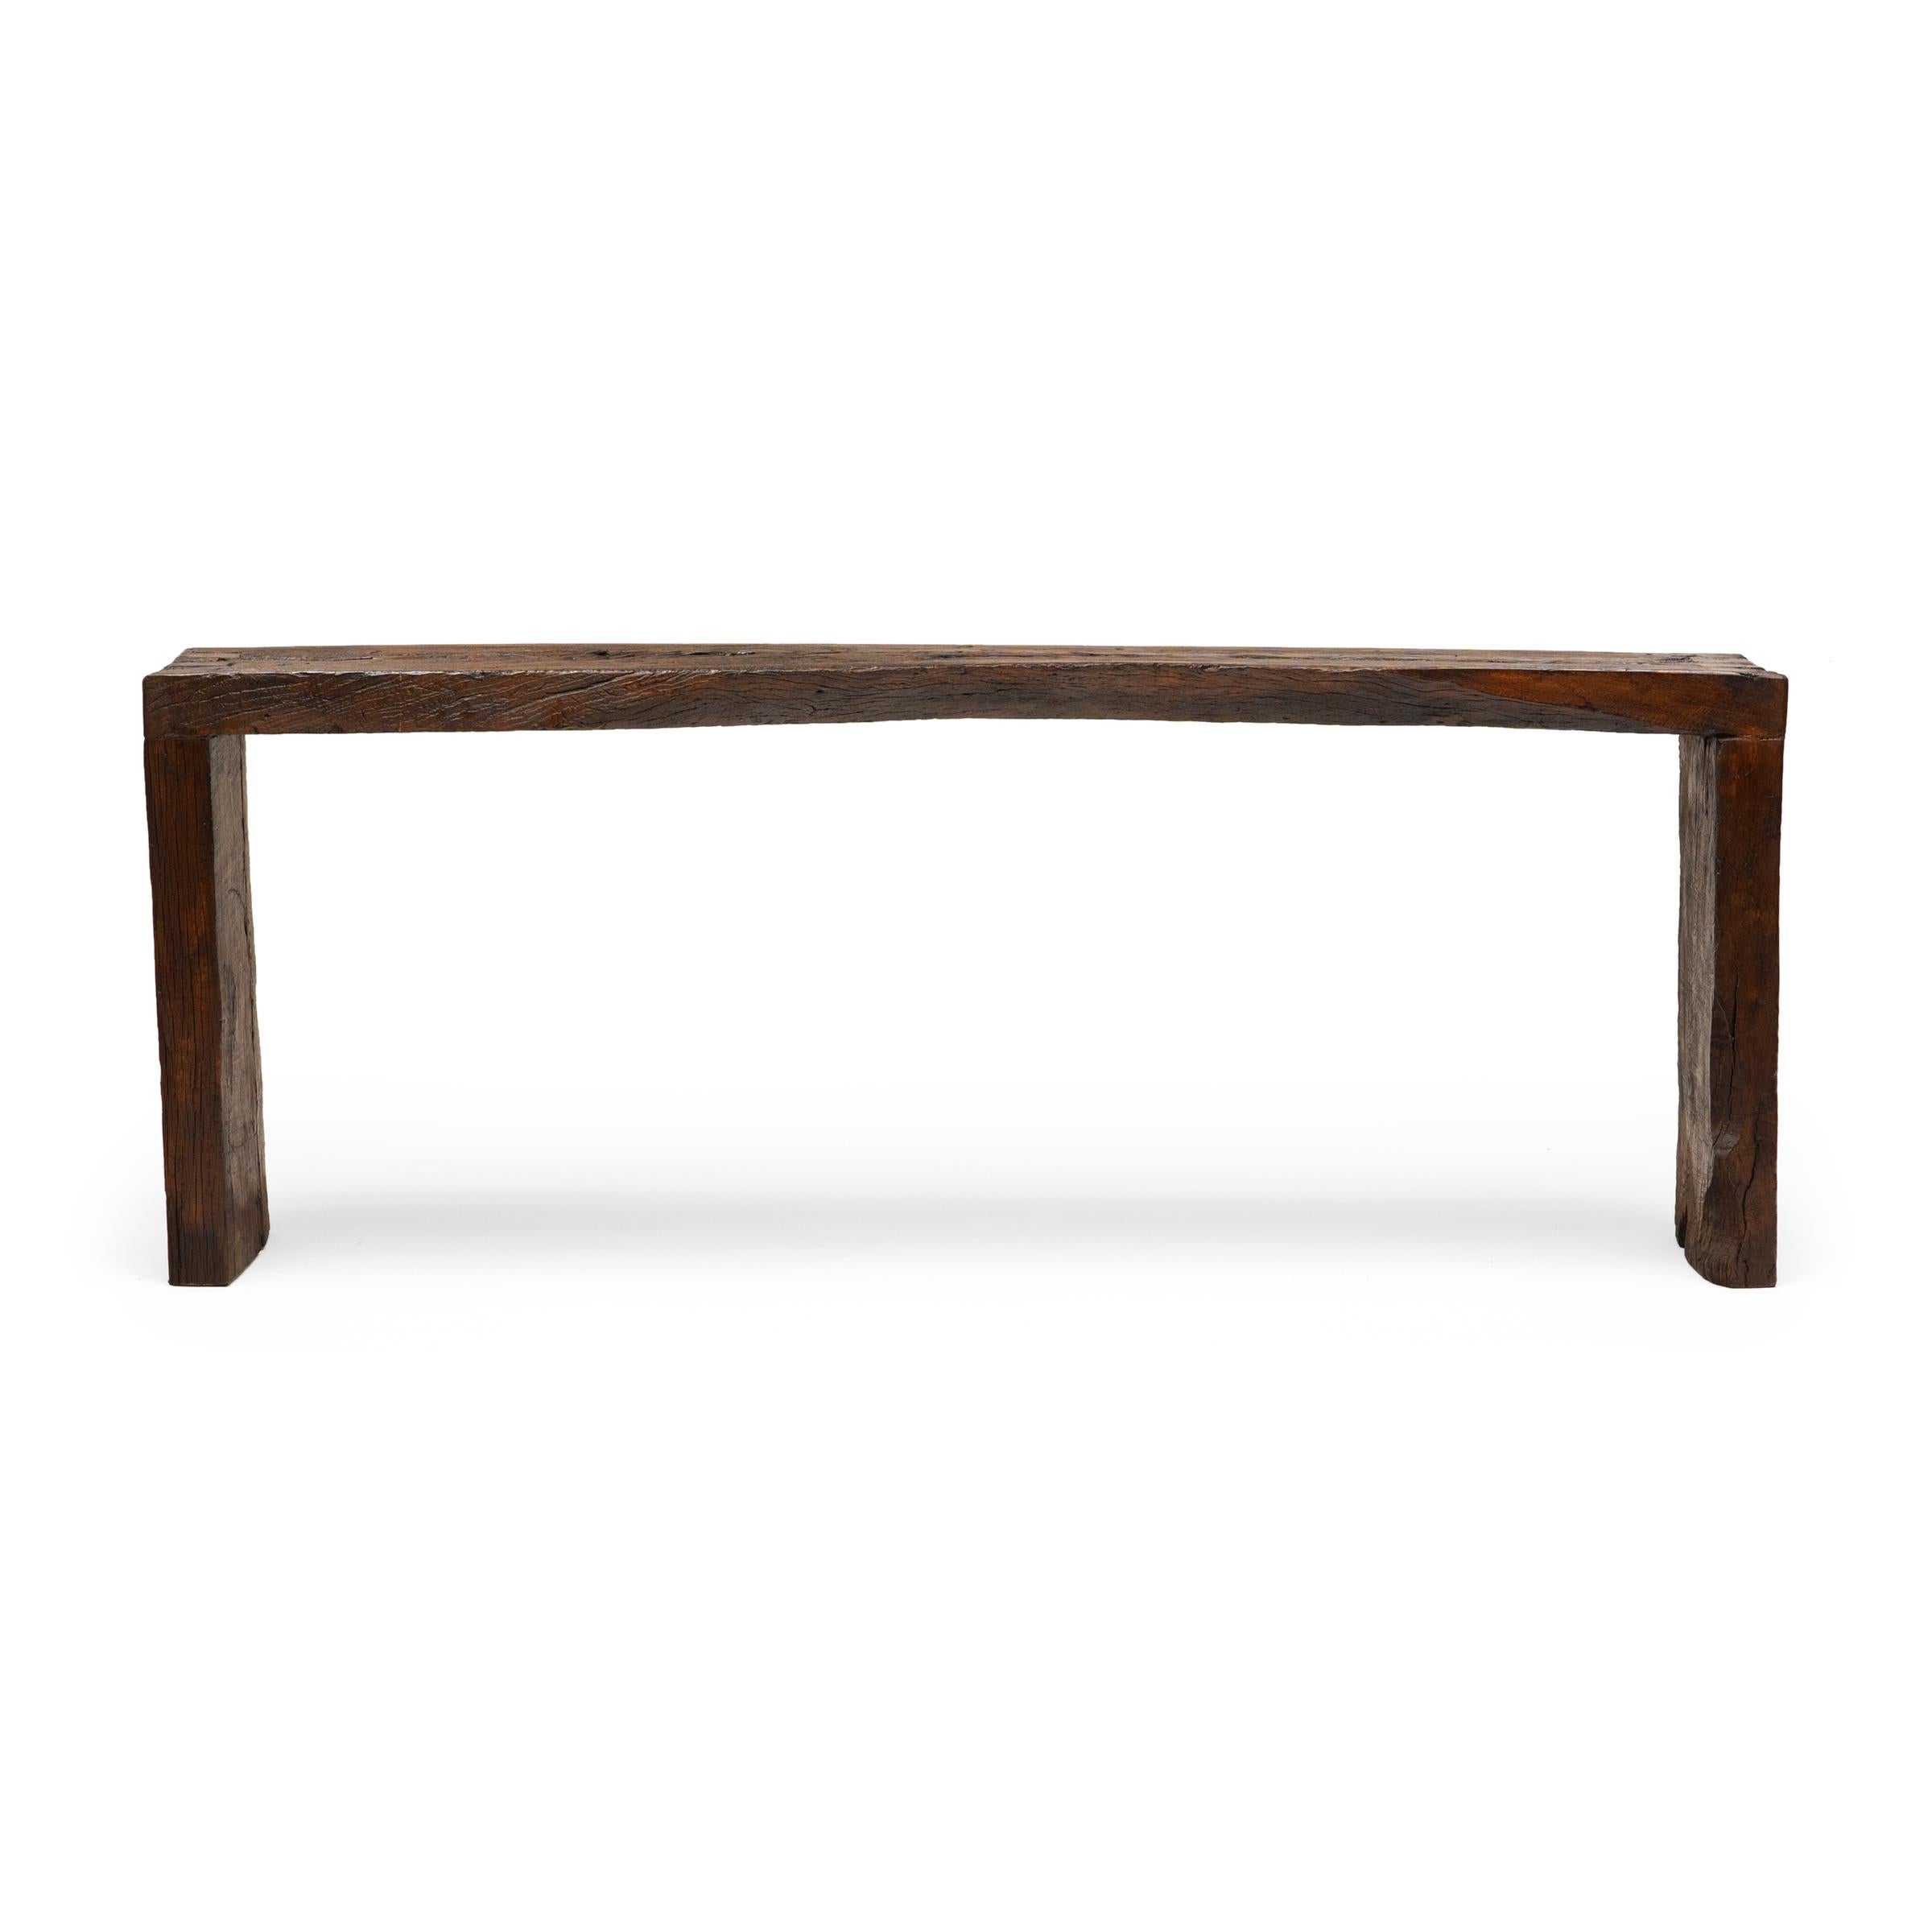 This contemporary console table is a celebration of wabi-sabi style. Crafted of wood reclaimed from Qing-dynasty architecture, the table has a minimalist waterfall design with dovetailed corners that recreate traditional joinery methods. The long